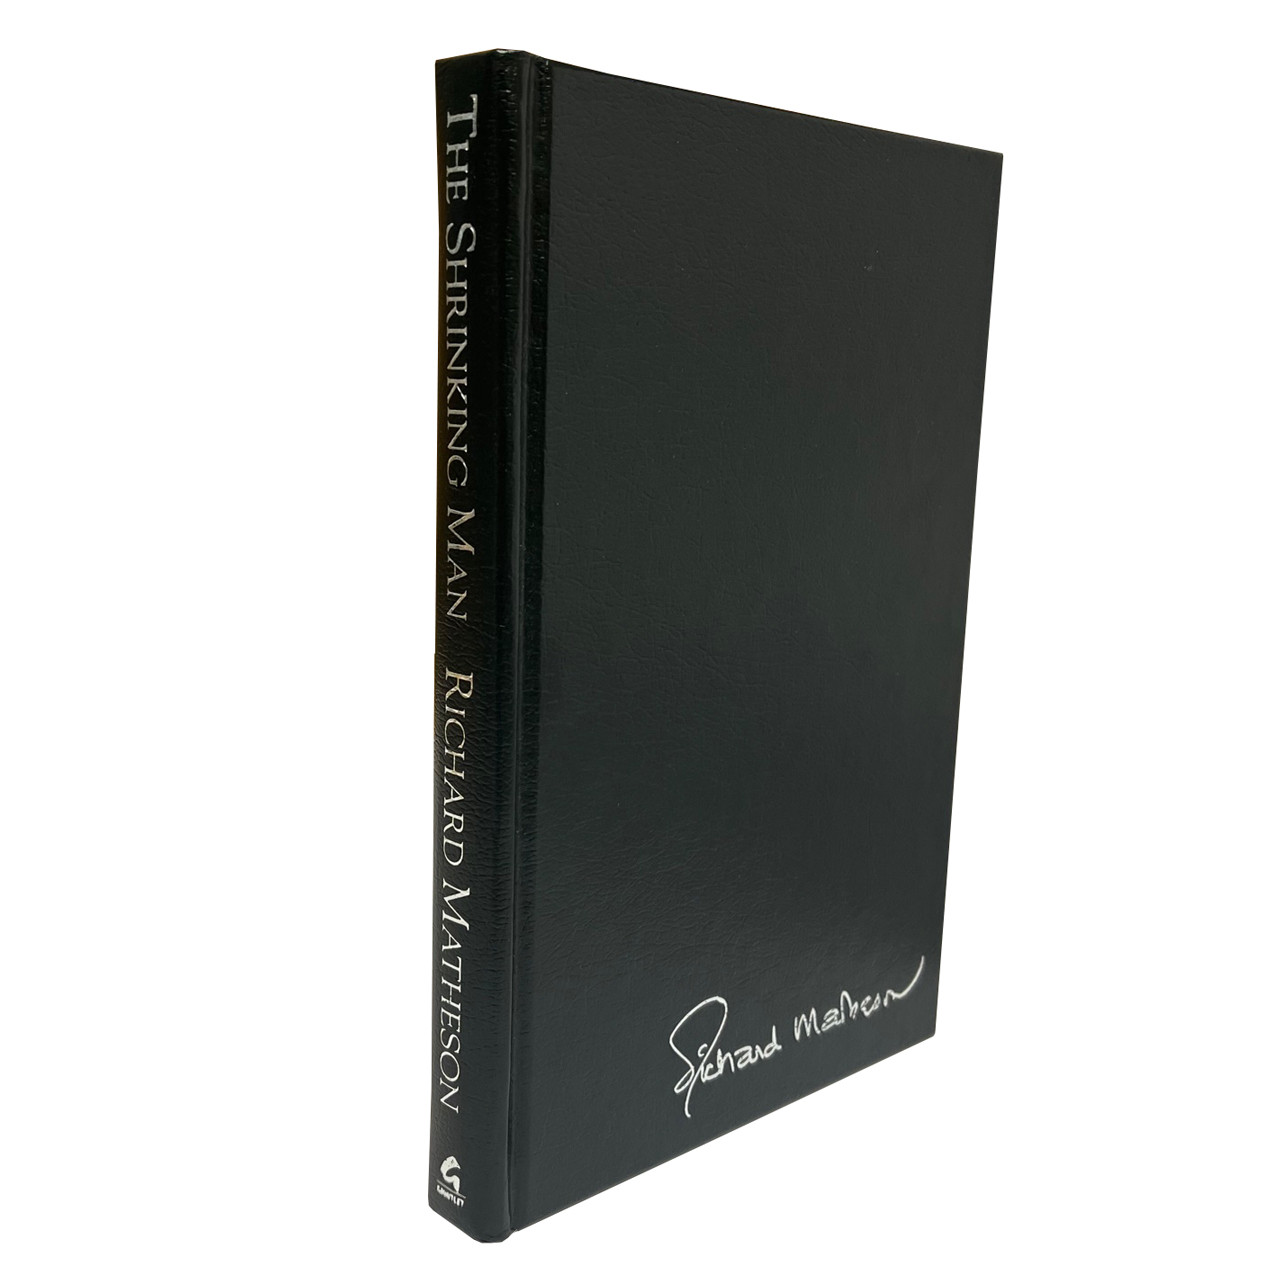 Richard Matheson "The Shrinking Man" Signed Lettered Edition of 52, Leather Bound Collector's Edition [Very Fine]